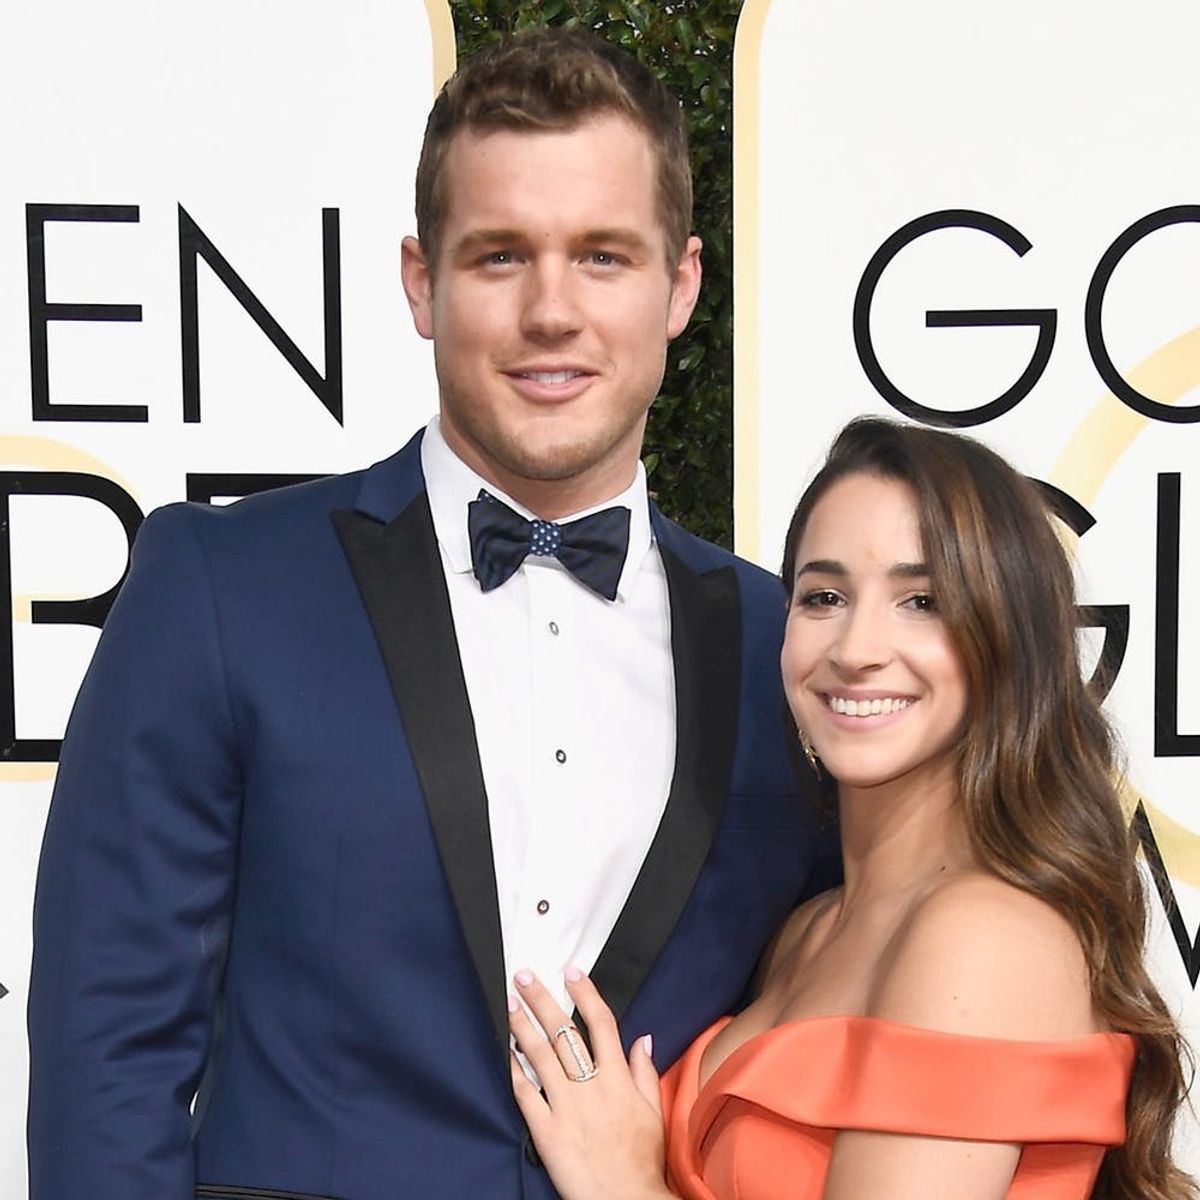 This ‘Bachelorette’ Contestant Used to Date Olympic Gymnast Aly Raisman